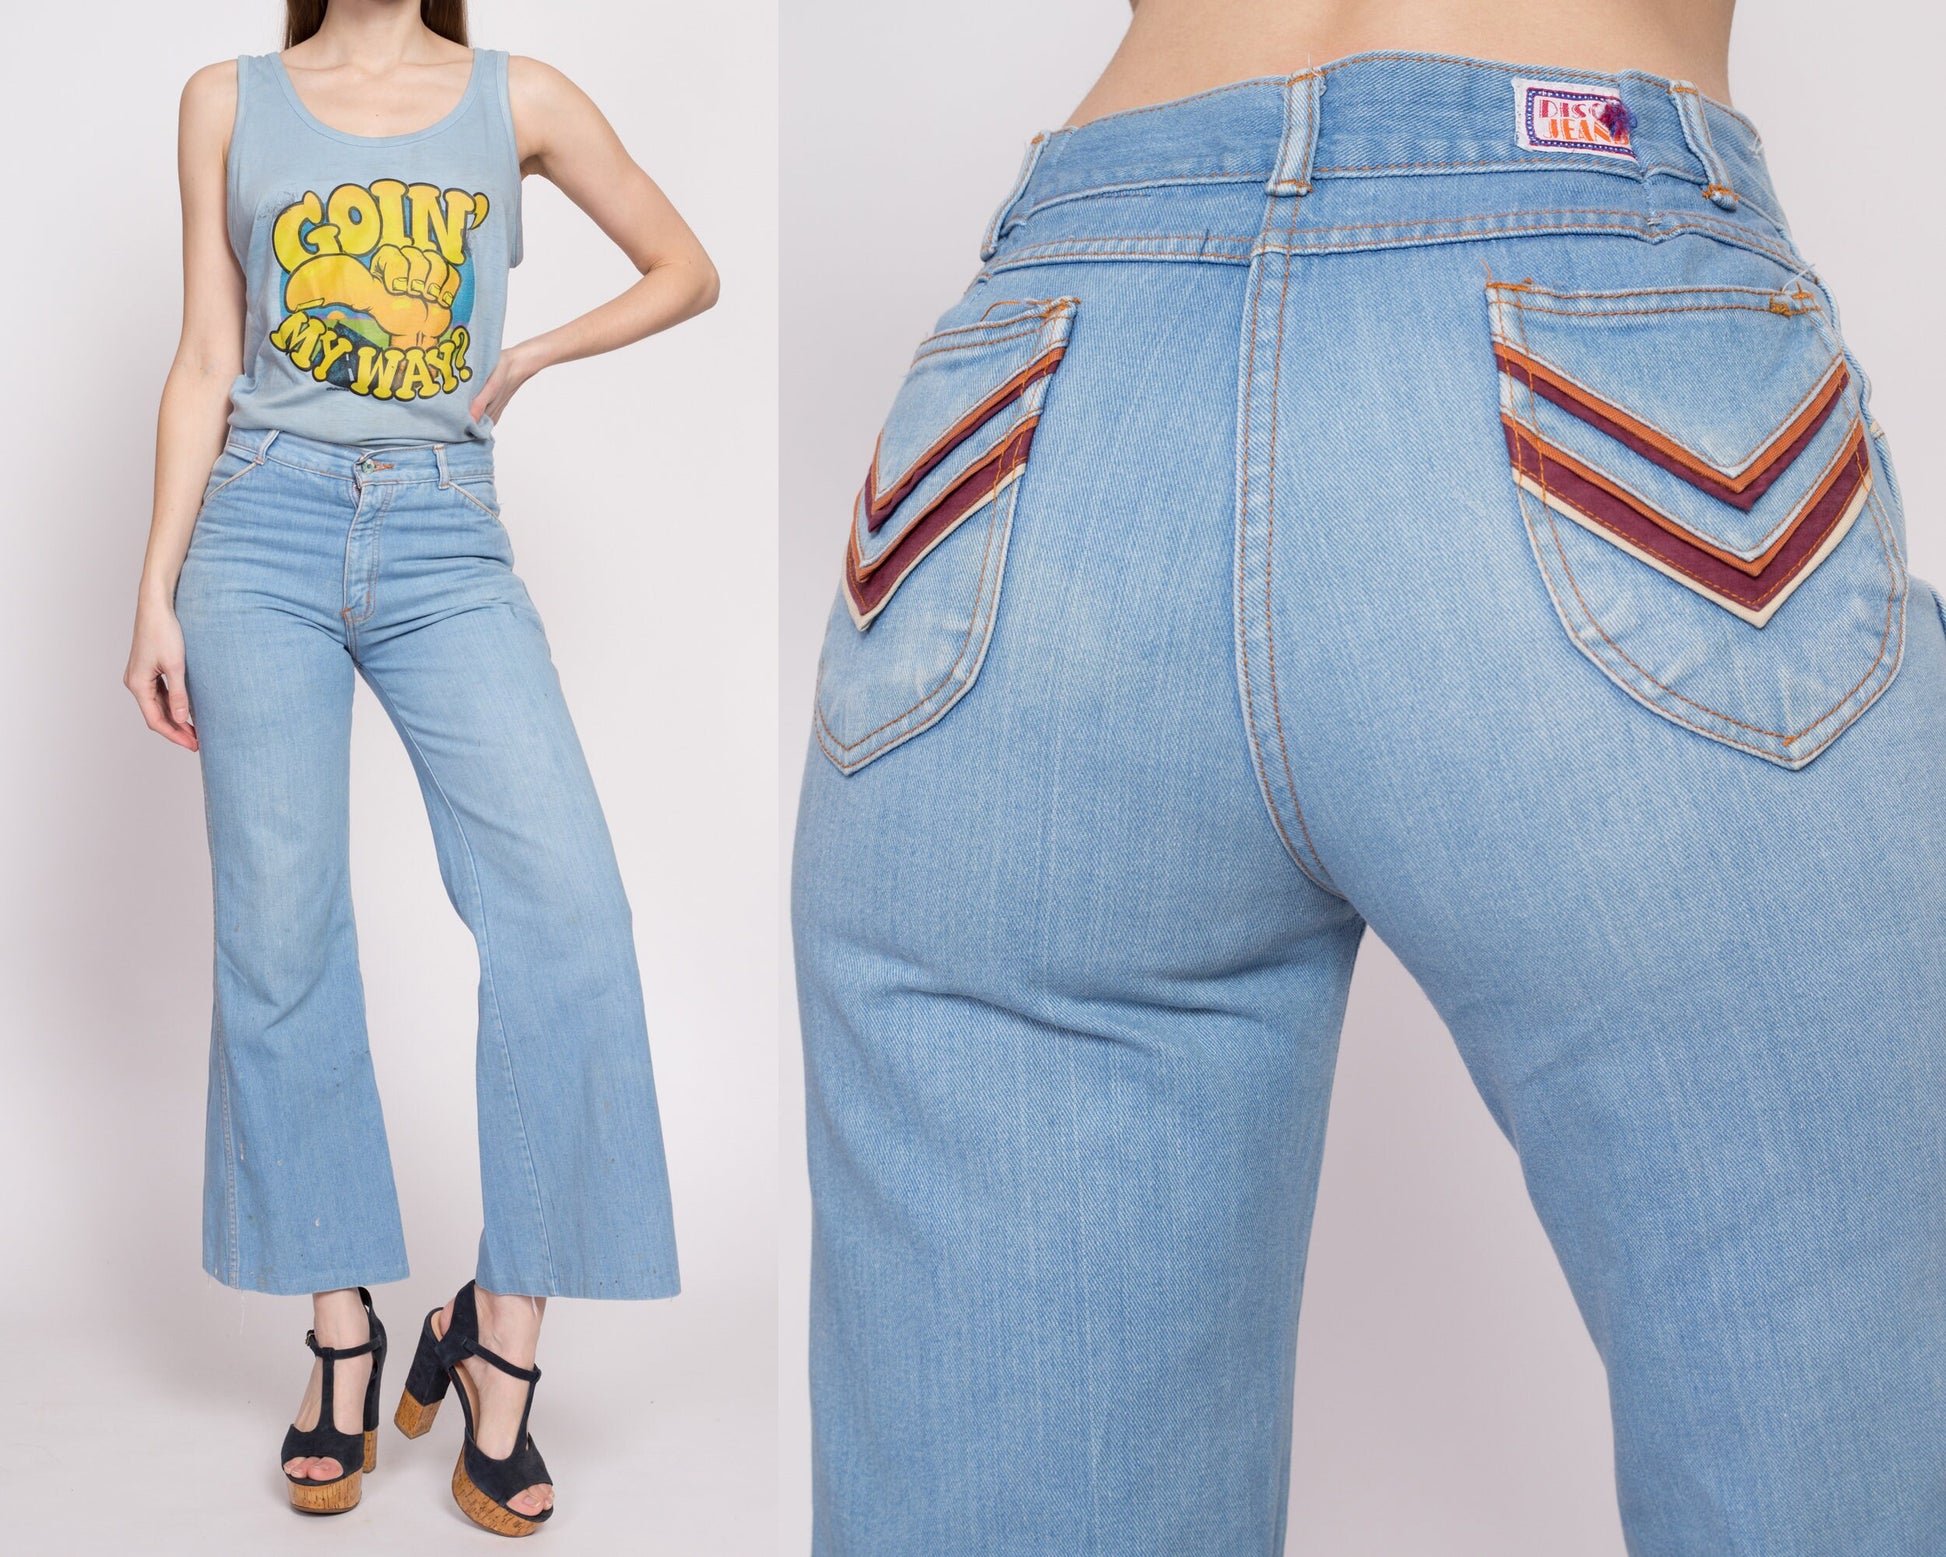 Denim Bell Bottom Pants for Women Trendy Vintage Jeans Wide Leg Stretchy  Jeans High Waist 70s 80s Trousers 